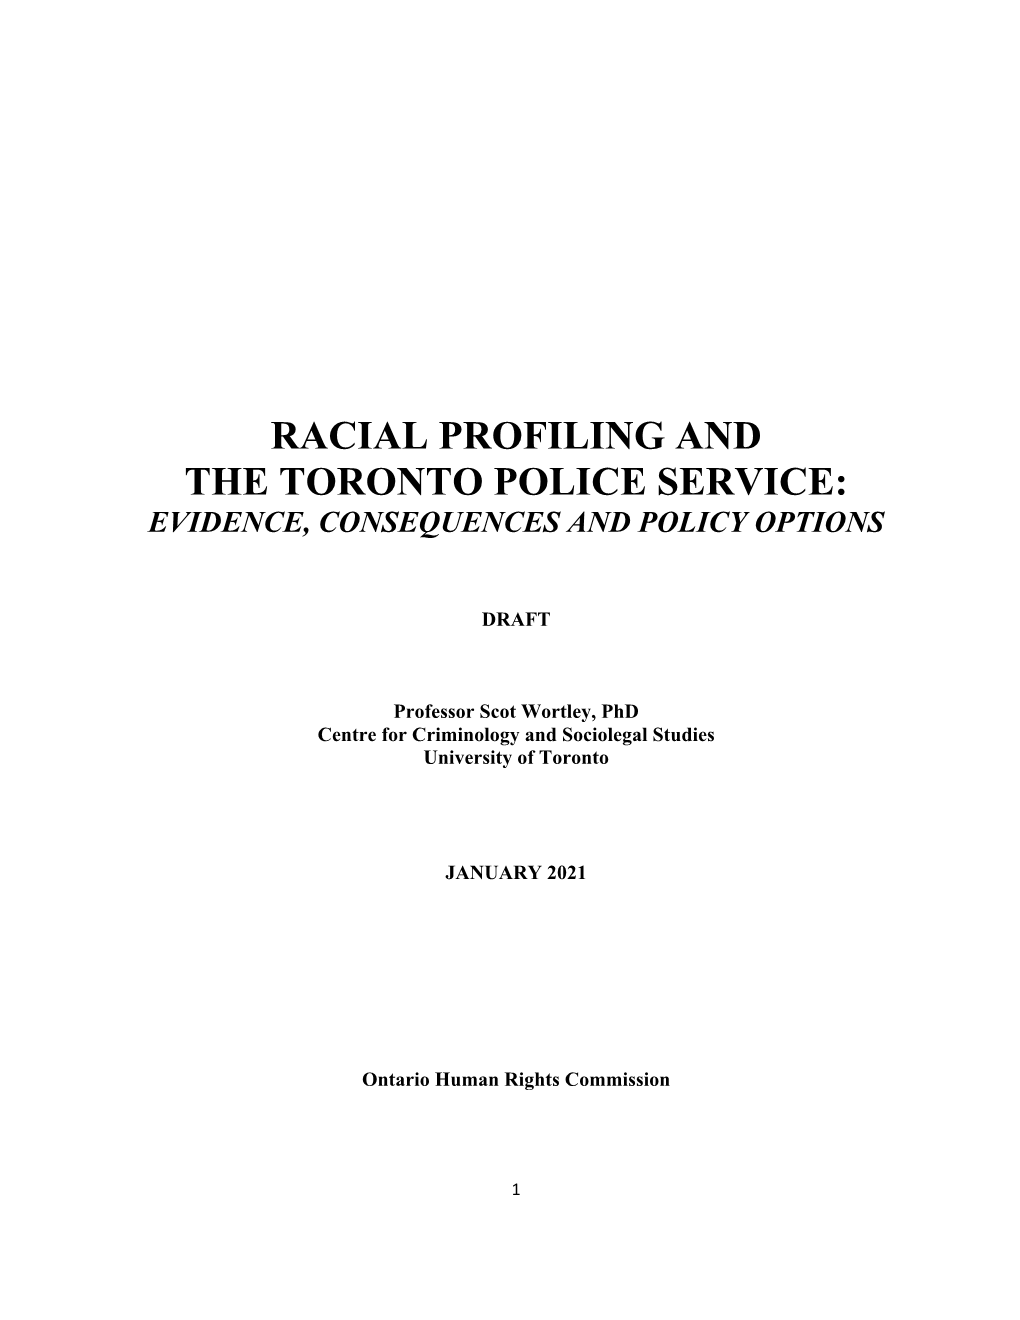 Racial Profiling and the Toronto Police Service : Evidence, Consequences, and Policy Options